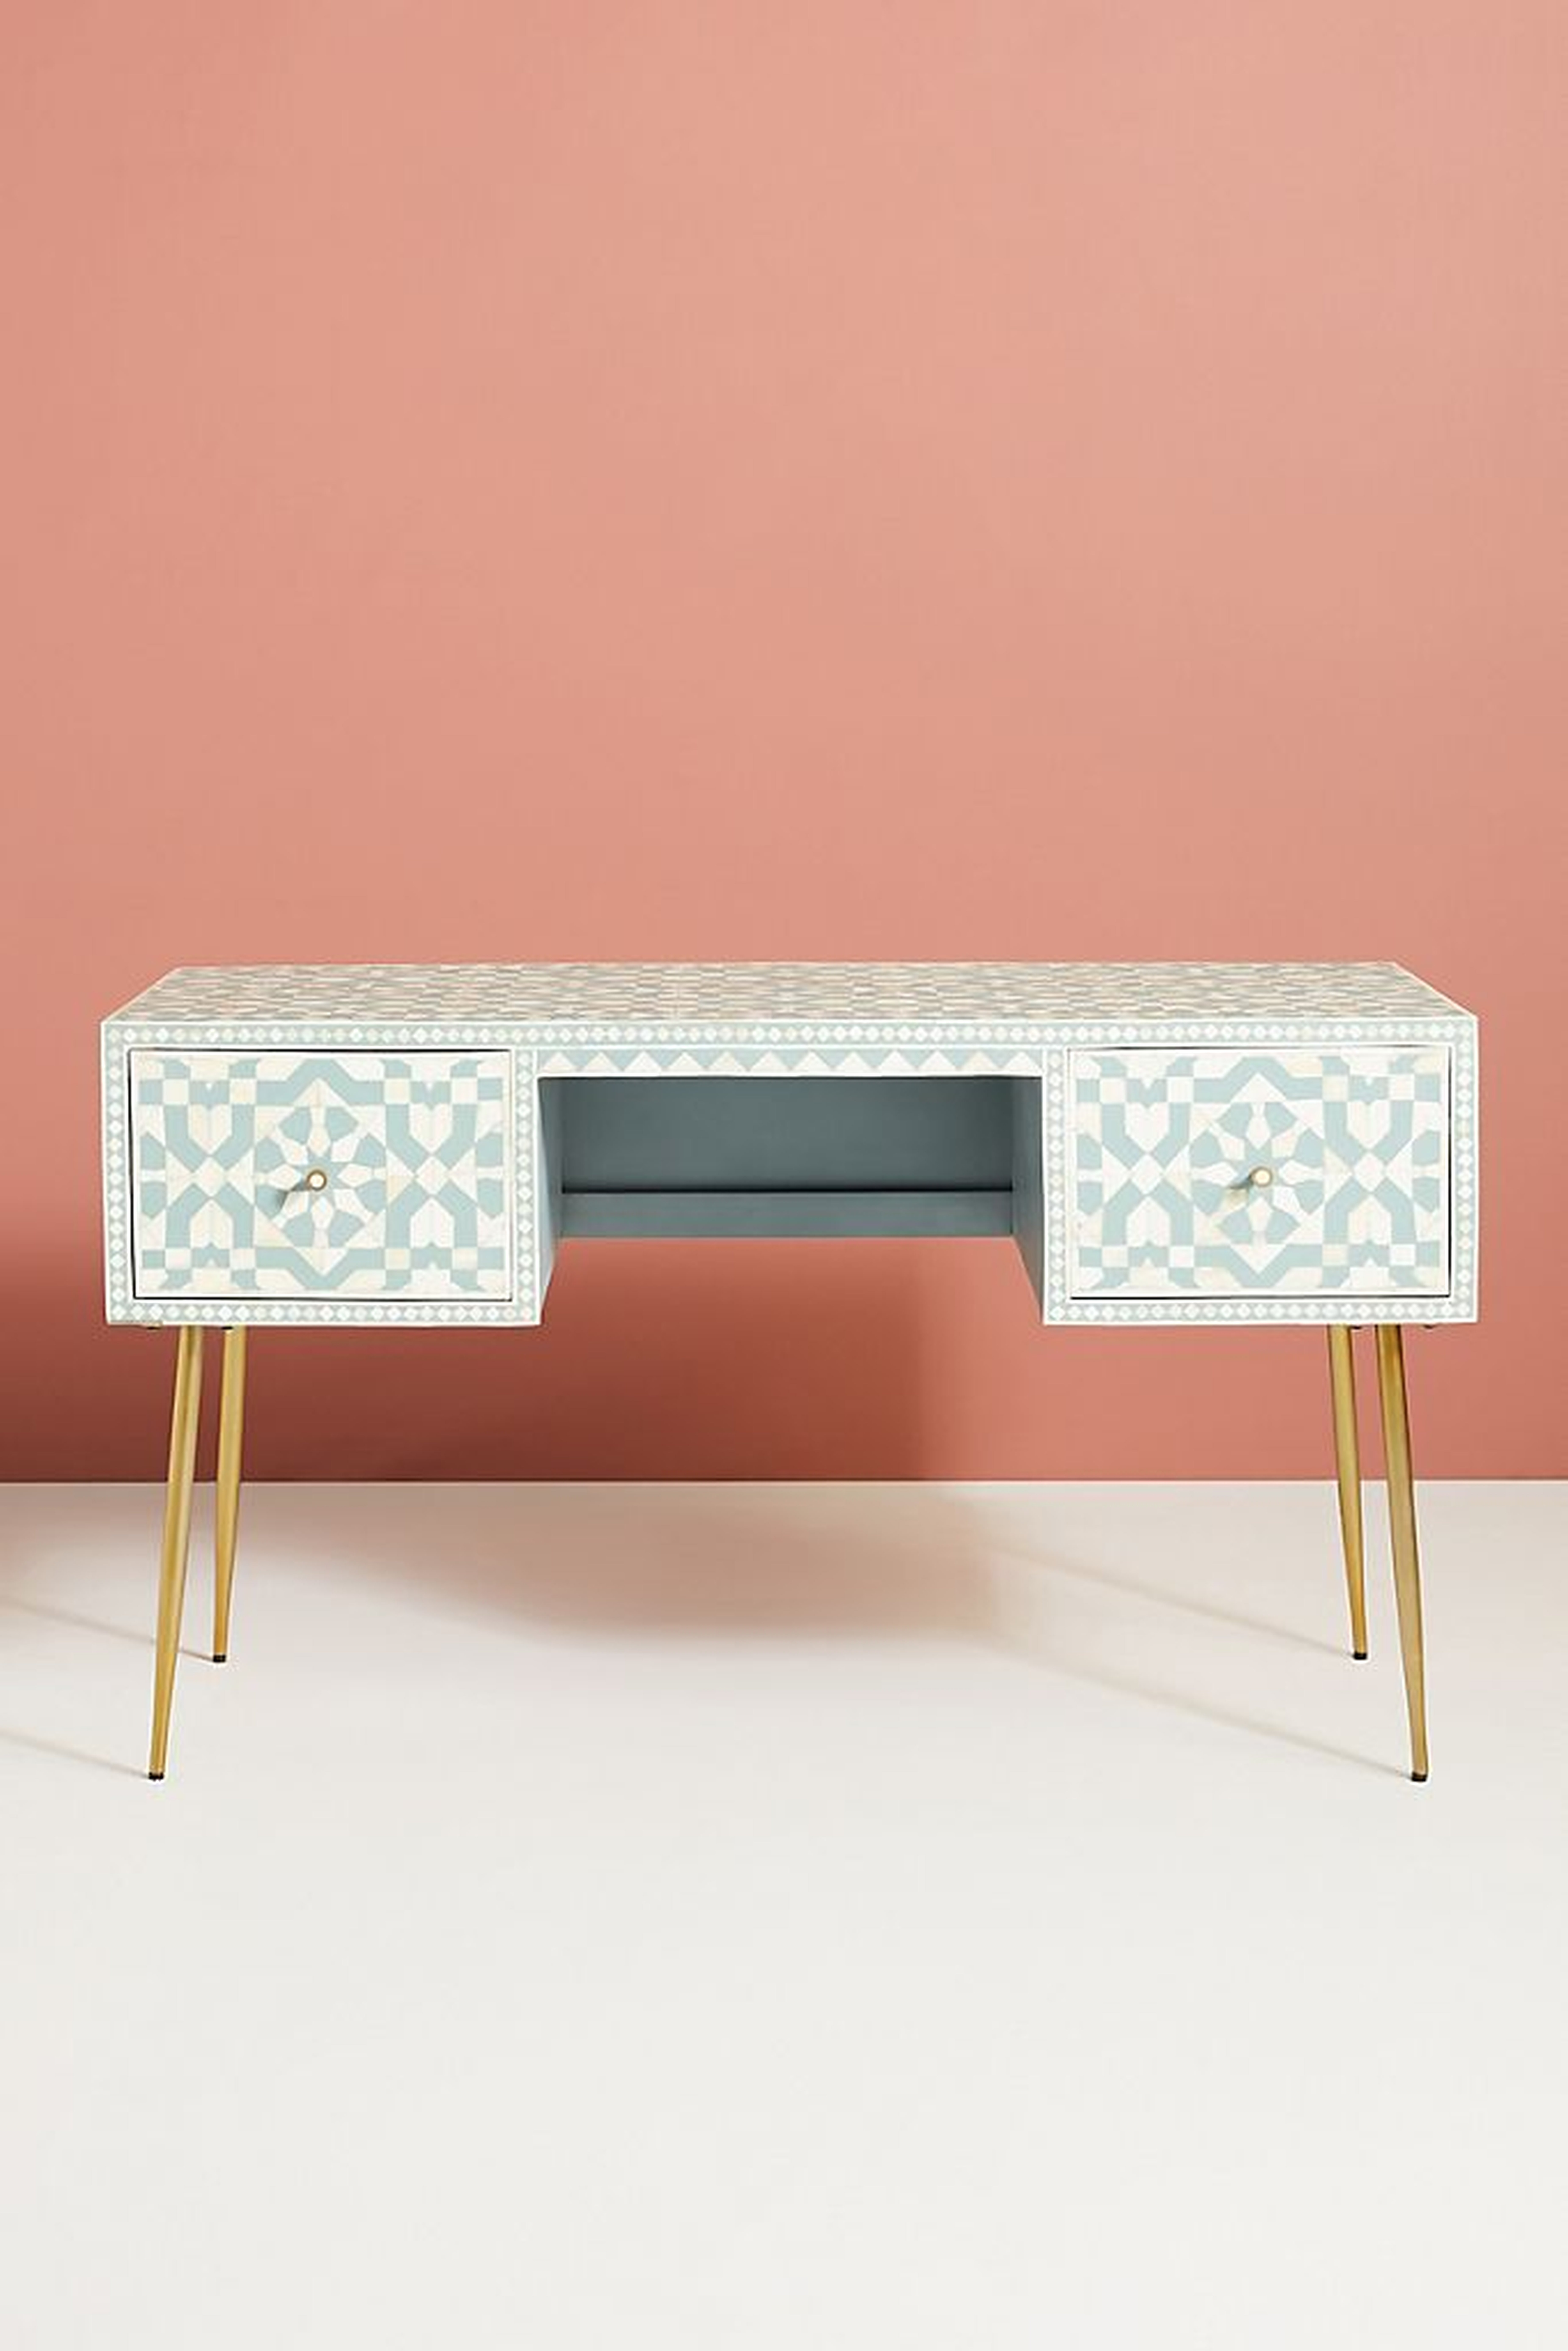 Moroccan Inlay Desk By Anthropologie in Grey - Anthropologie